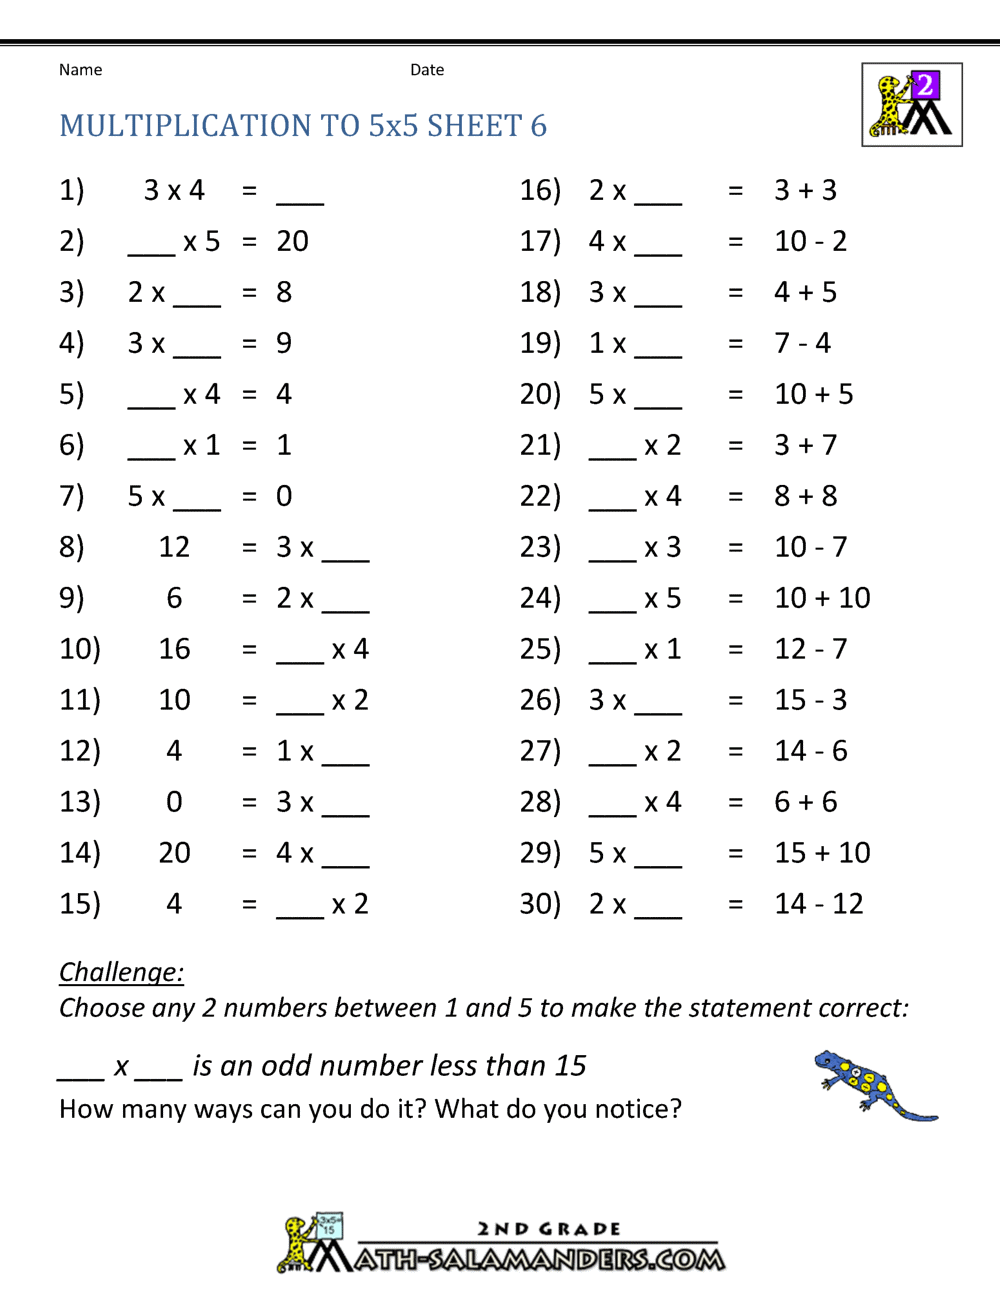 multiplication-practice-worksheets-to-5x5